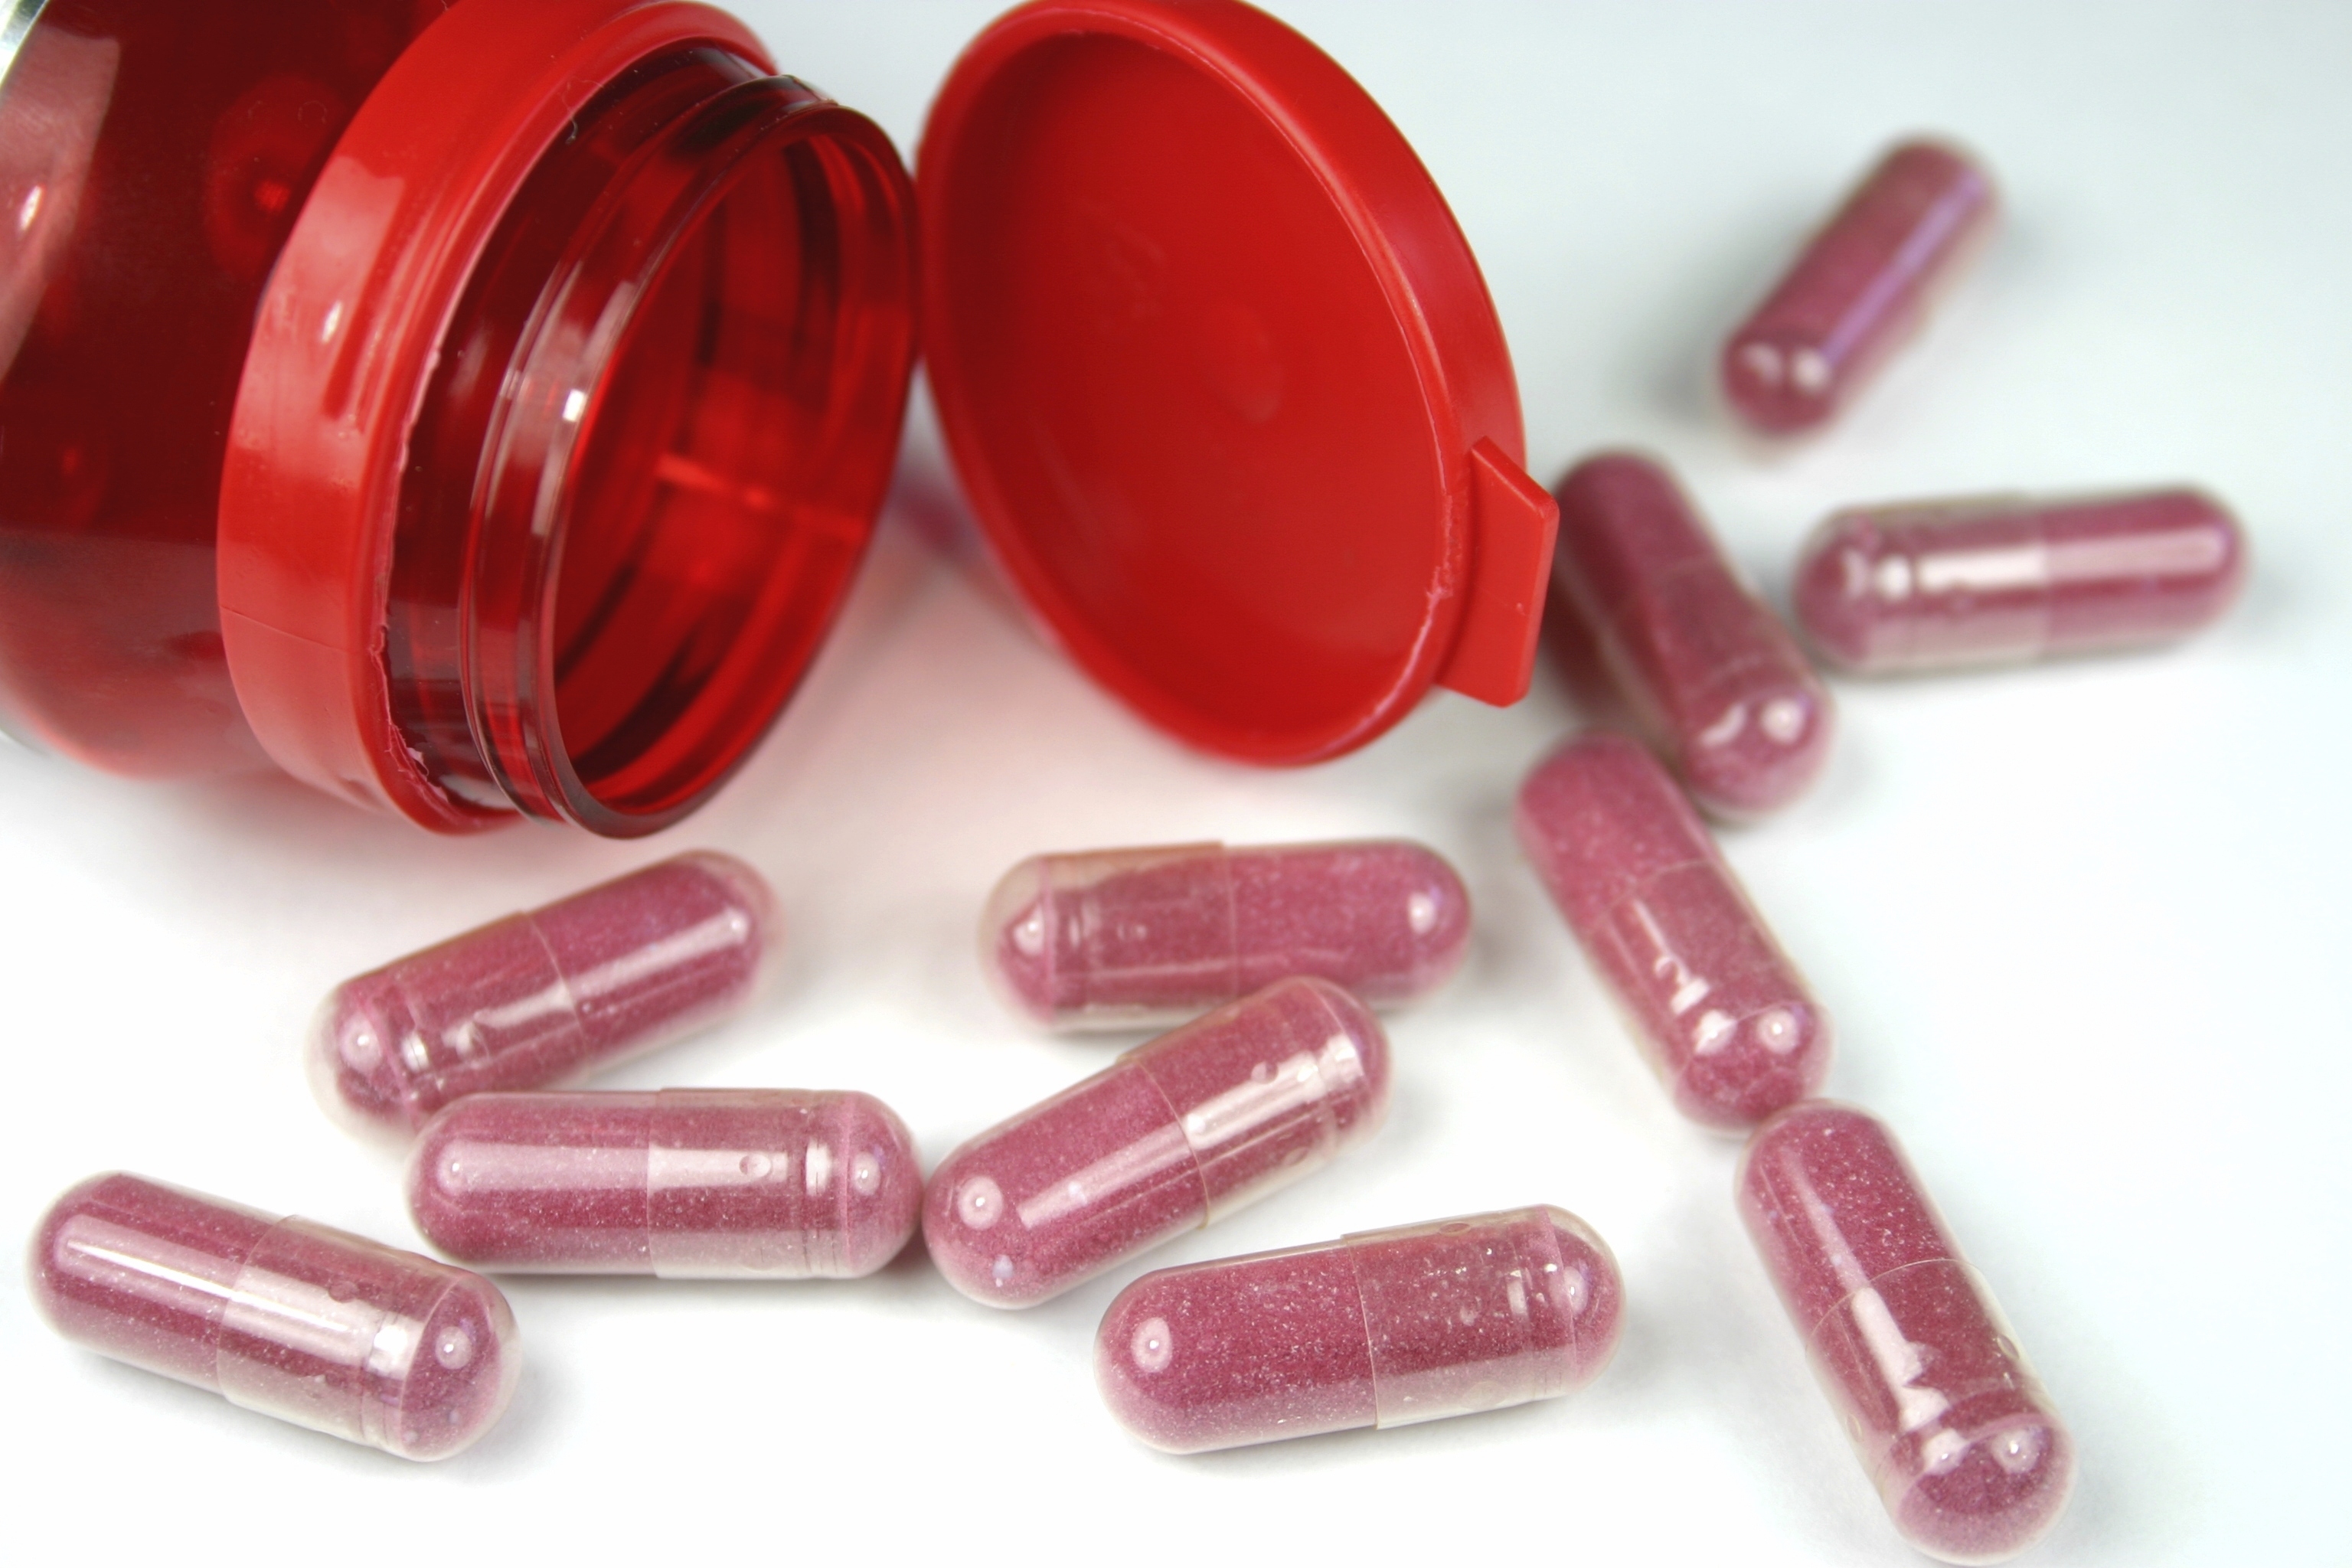 Cranberry Supplement For Uti